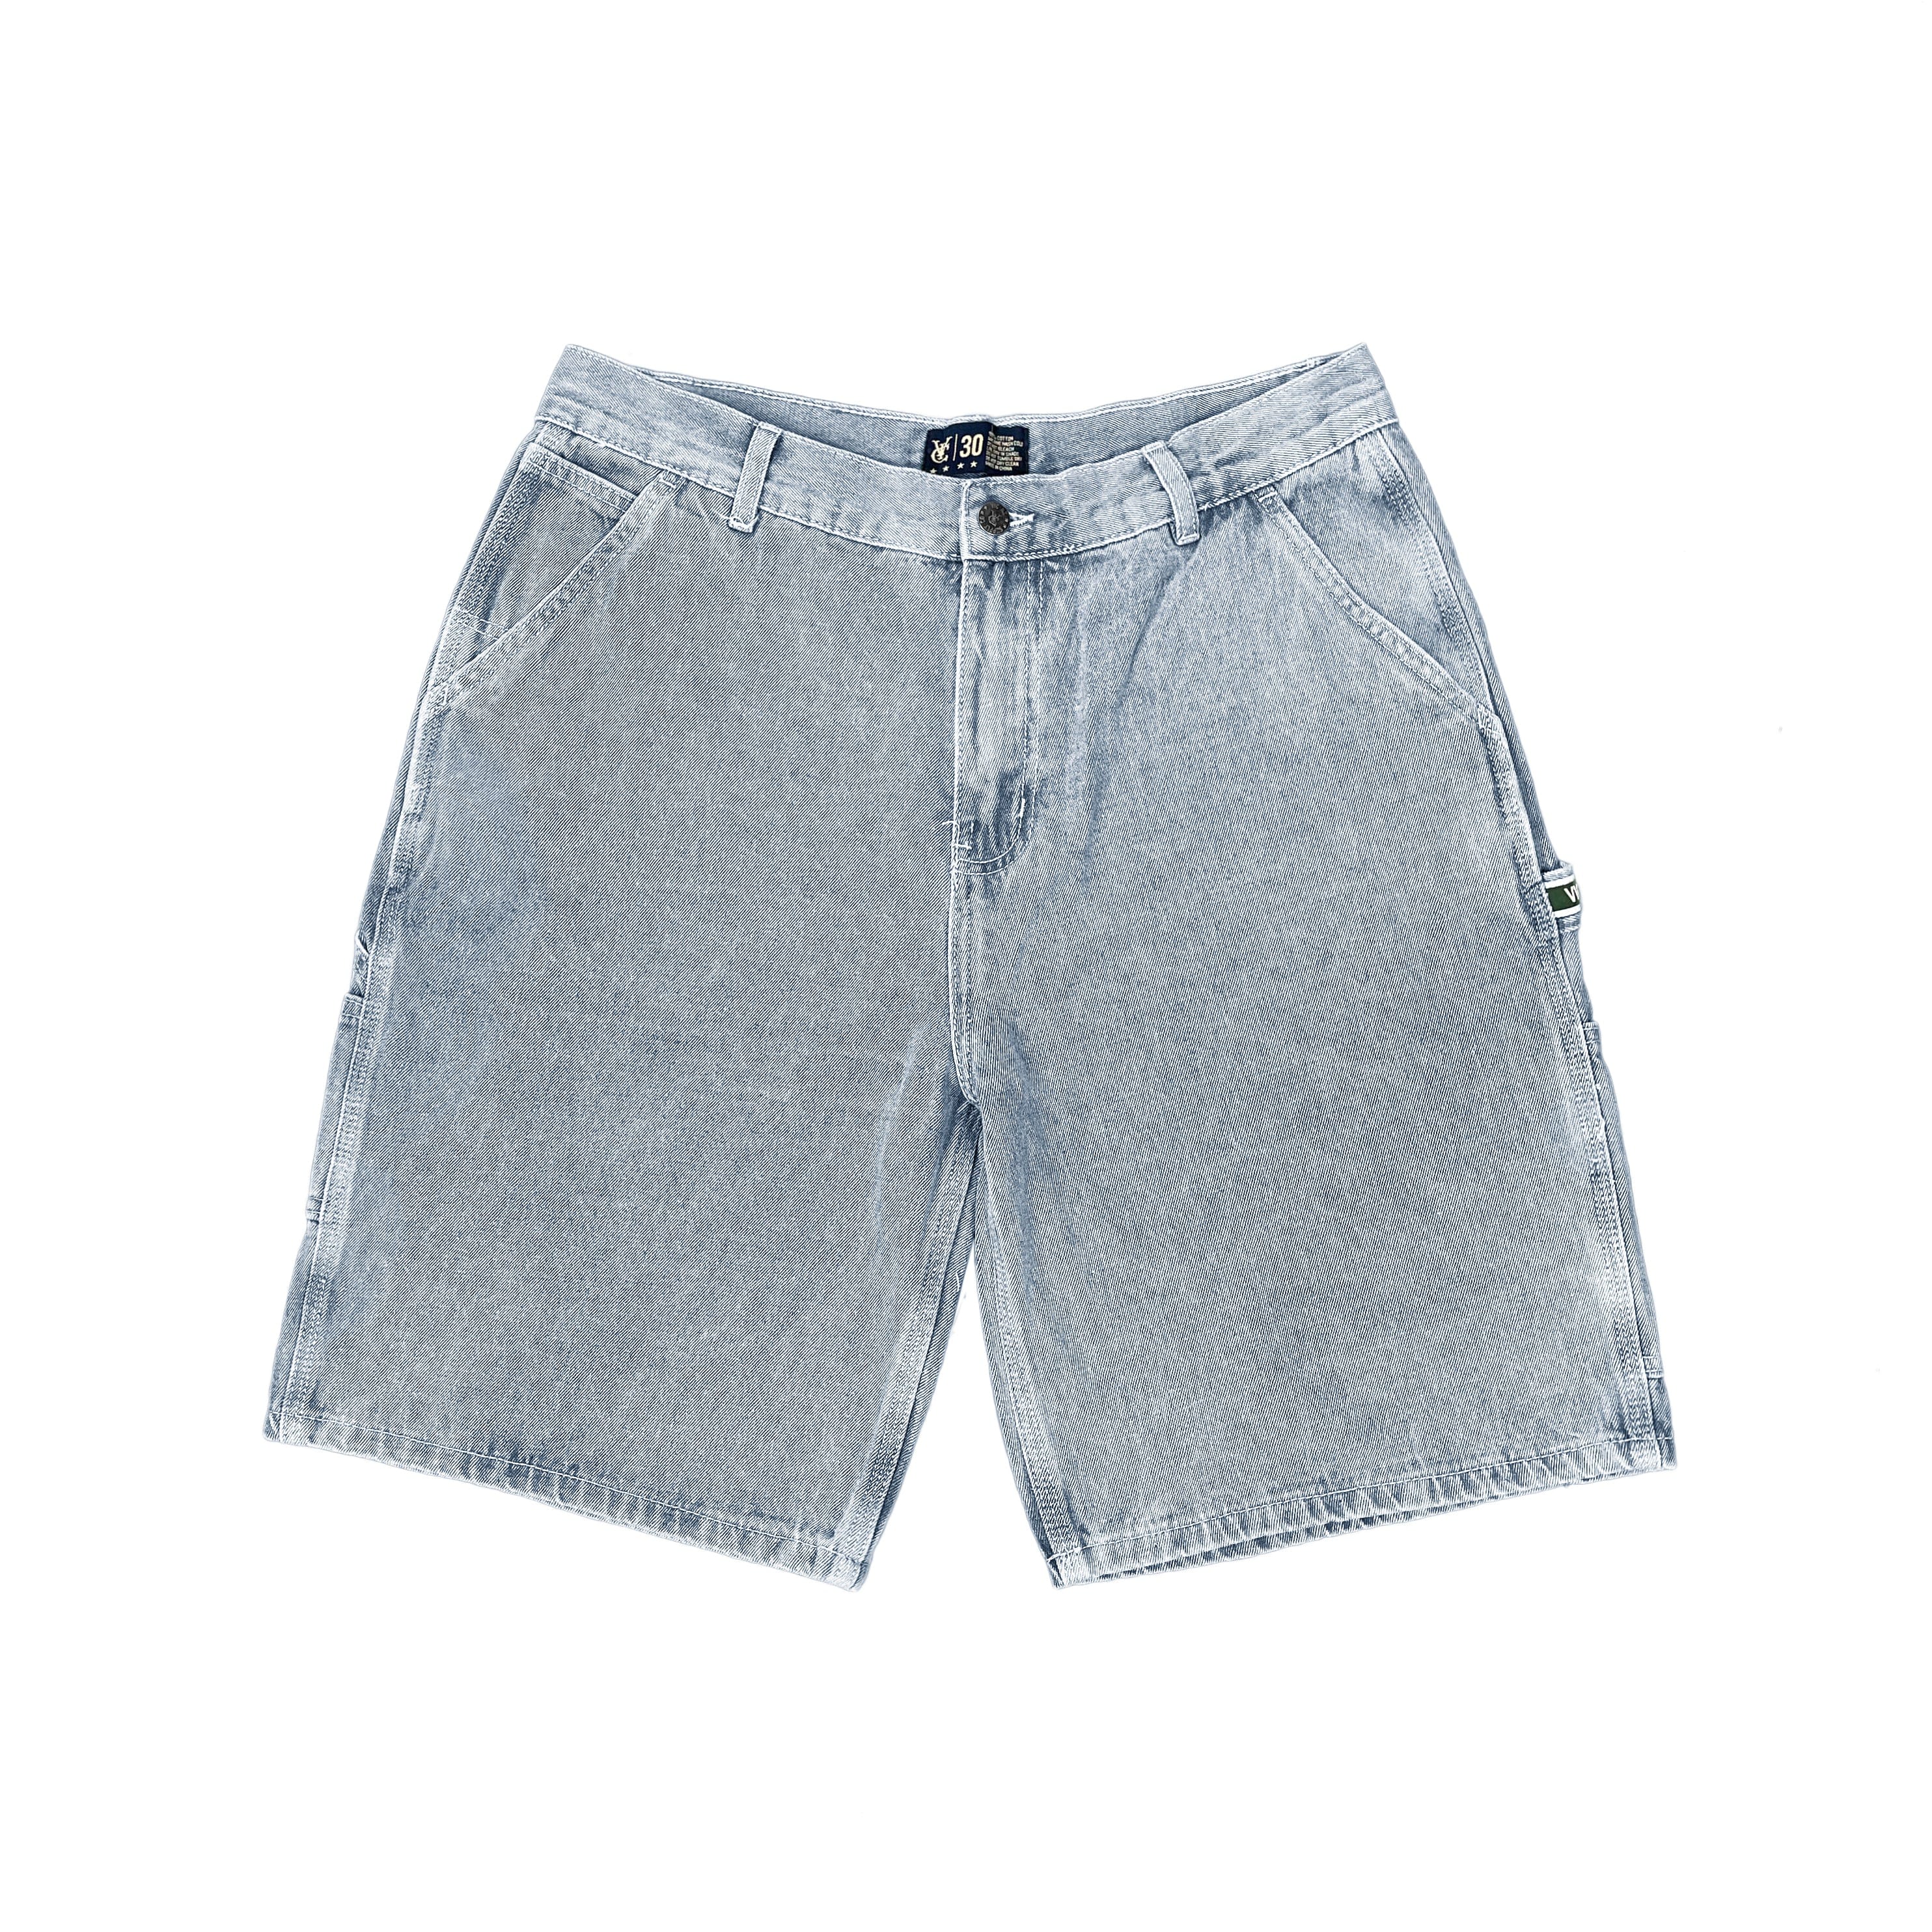 Premium quality carpenter denim shorts by New Zealand skate and streetwear clothing label VIC Apparel. New improved relaxed fit. Featuring utility pockets, a traditional hammer loop, and triple needle contrast stitching with the blue woven VIC patch on the hammer loop. Classic vintage workwear style jorts.